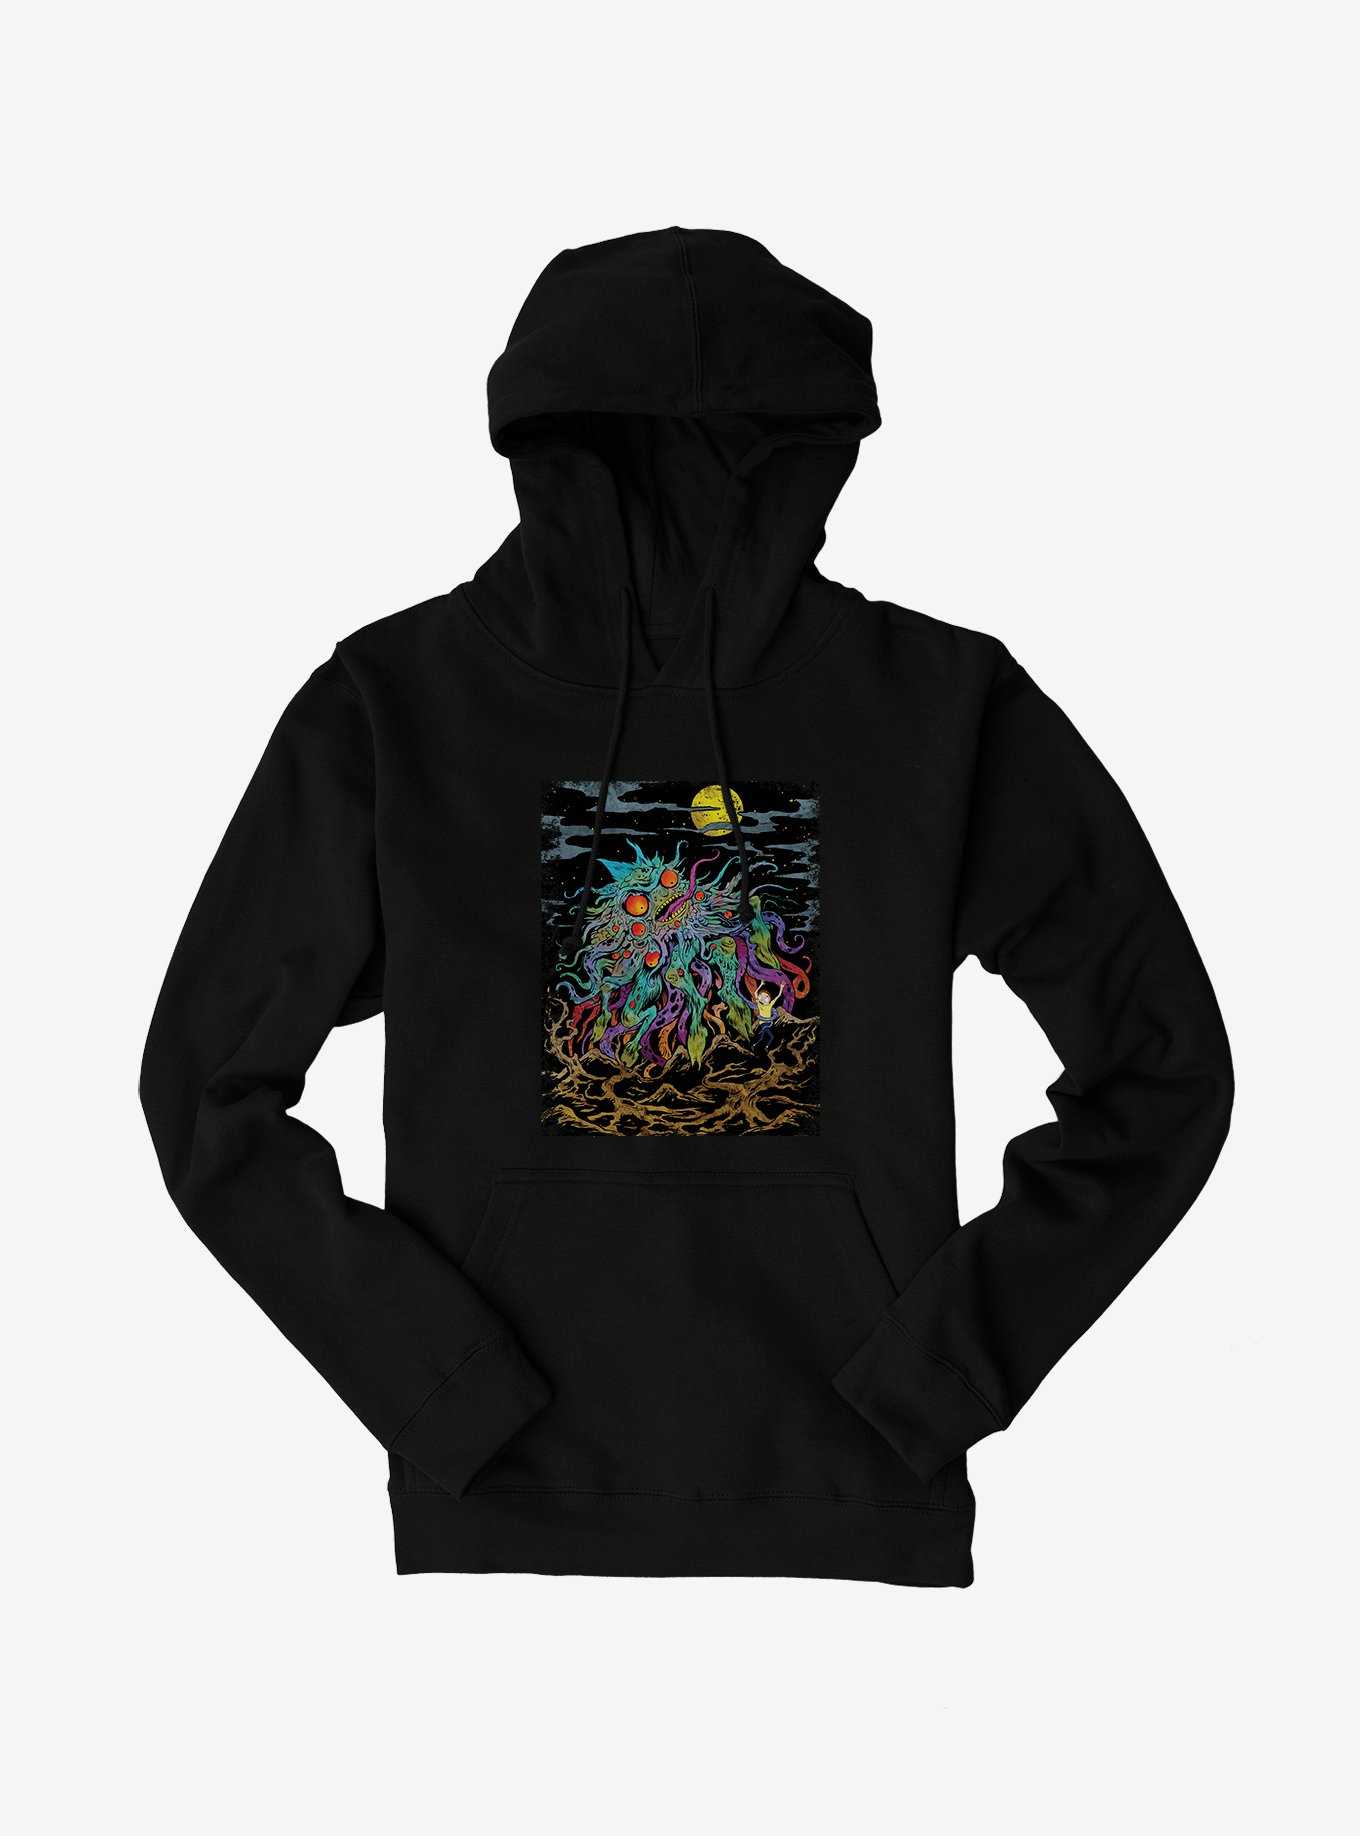 Rick And Morty Monster And Moon Hoodie, , hi-res